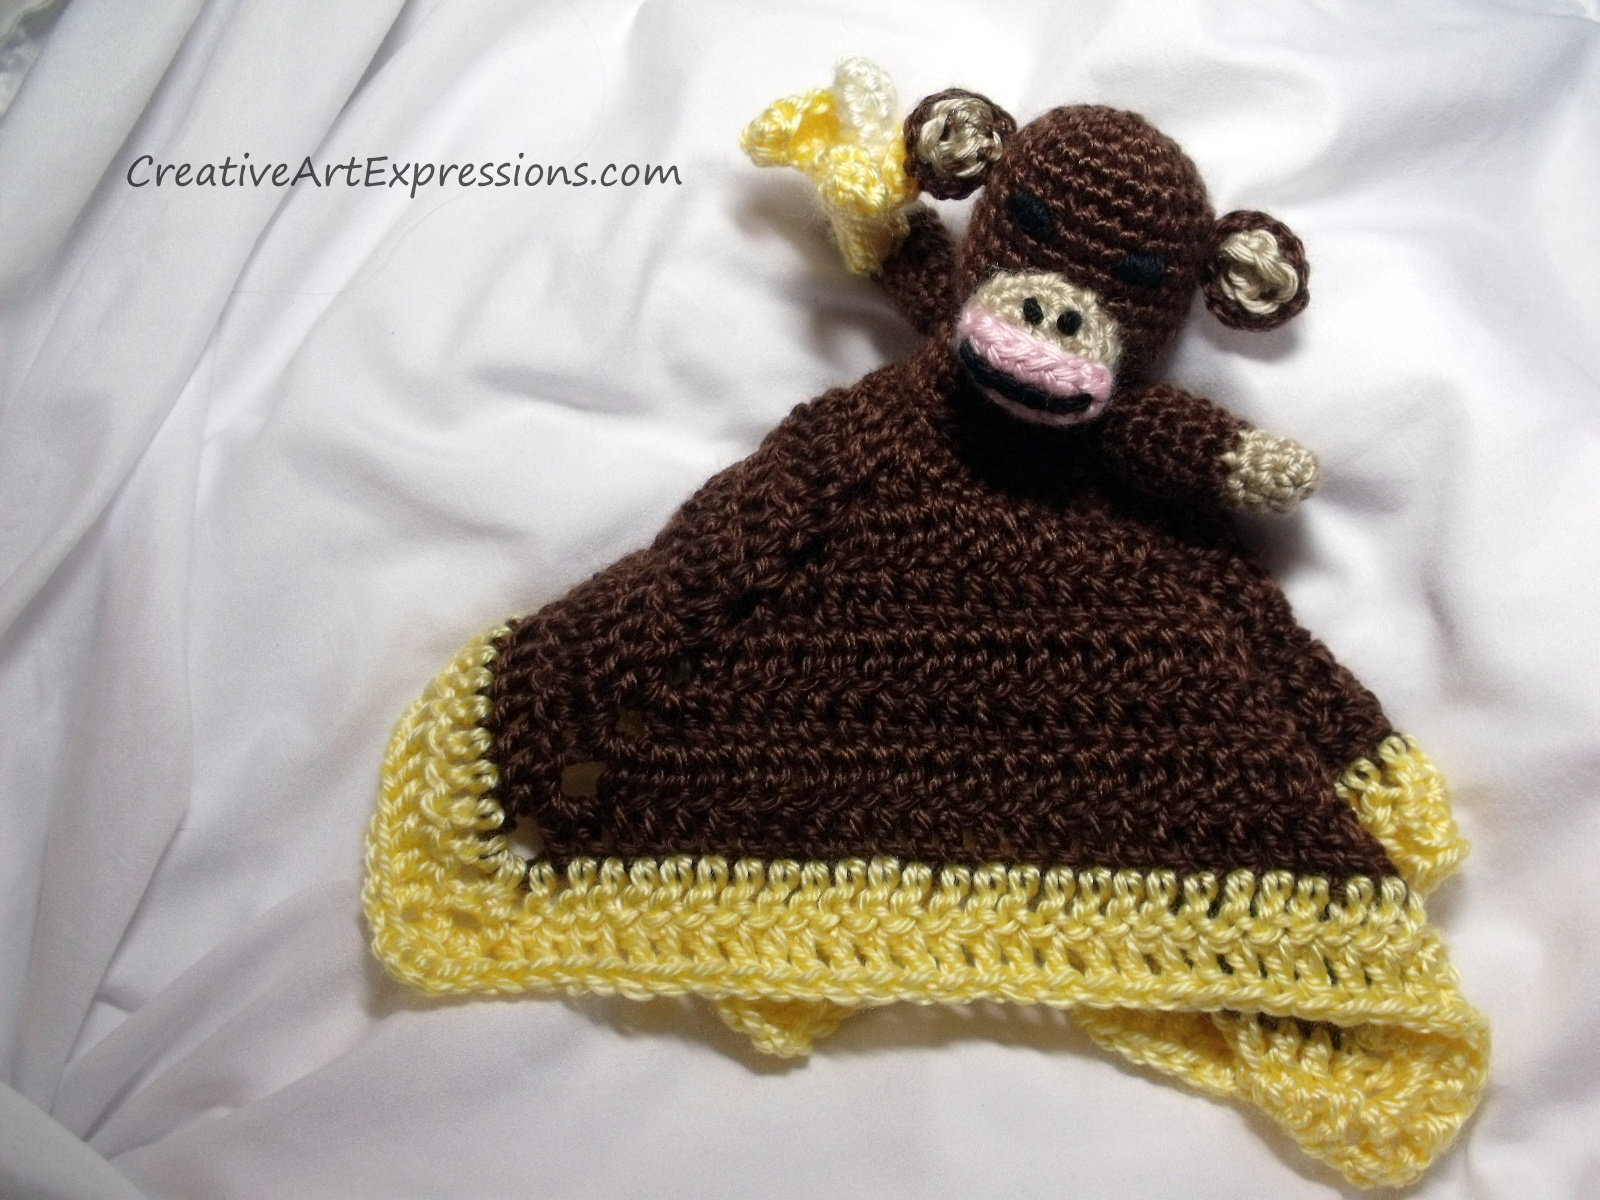 Creative Art Expressions Hand Crocheted Monkey Lovey